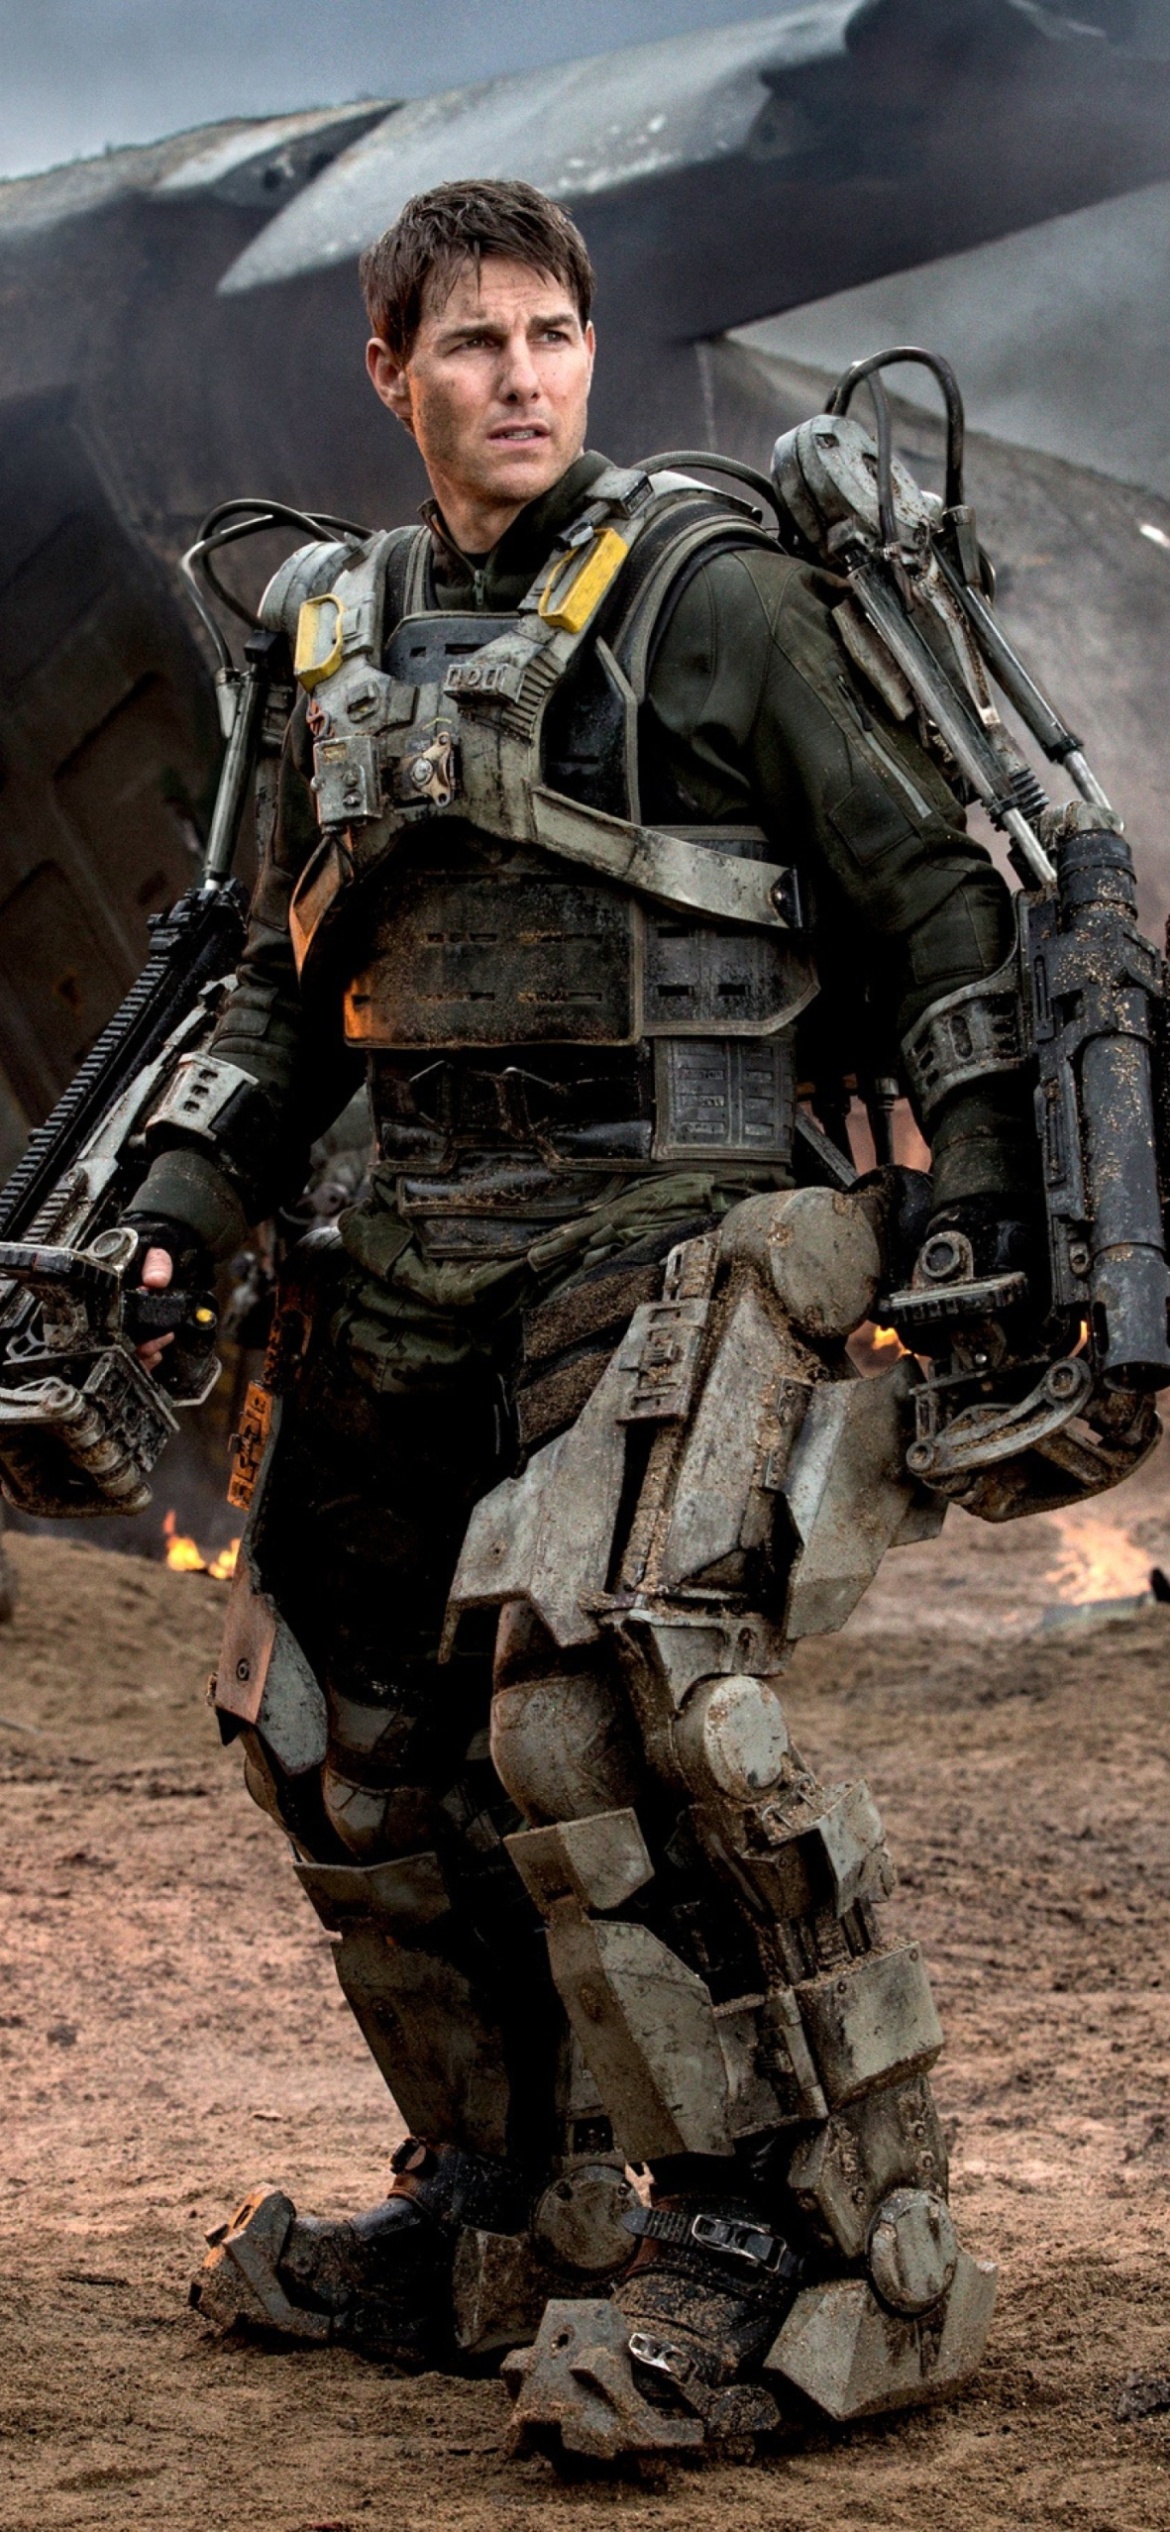 Edge of Tomorrow: Major William Cage, A landing operation against the aliens. 1170x2540 HD Background.